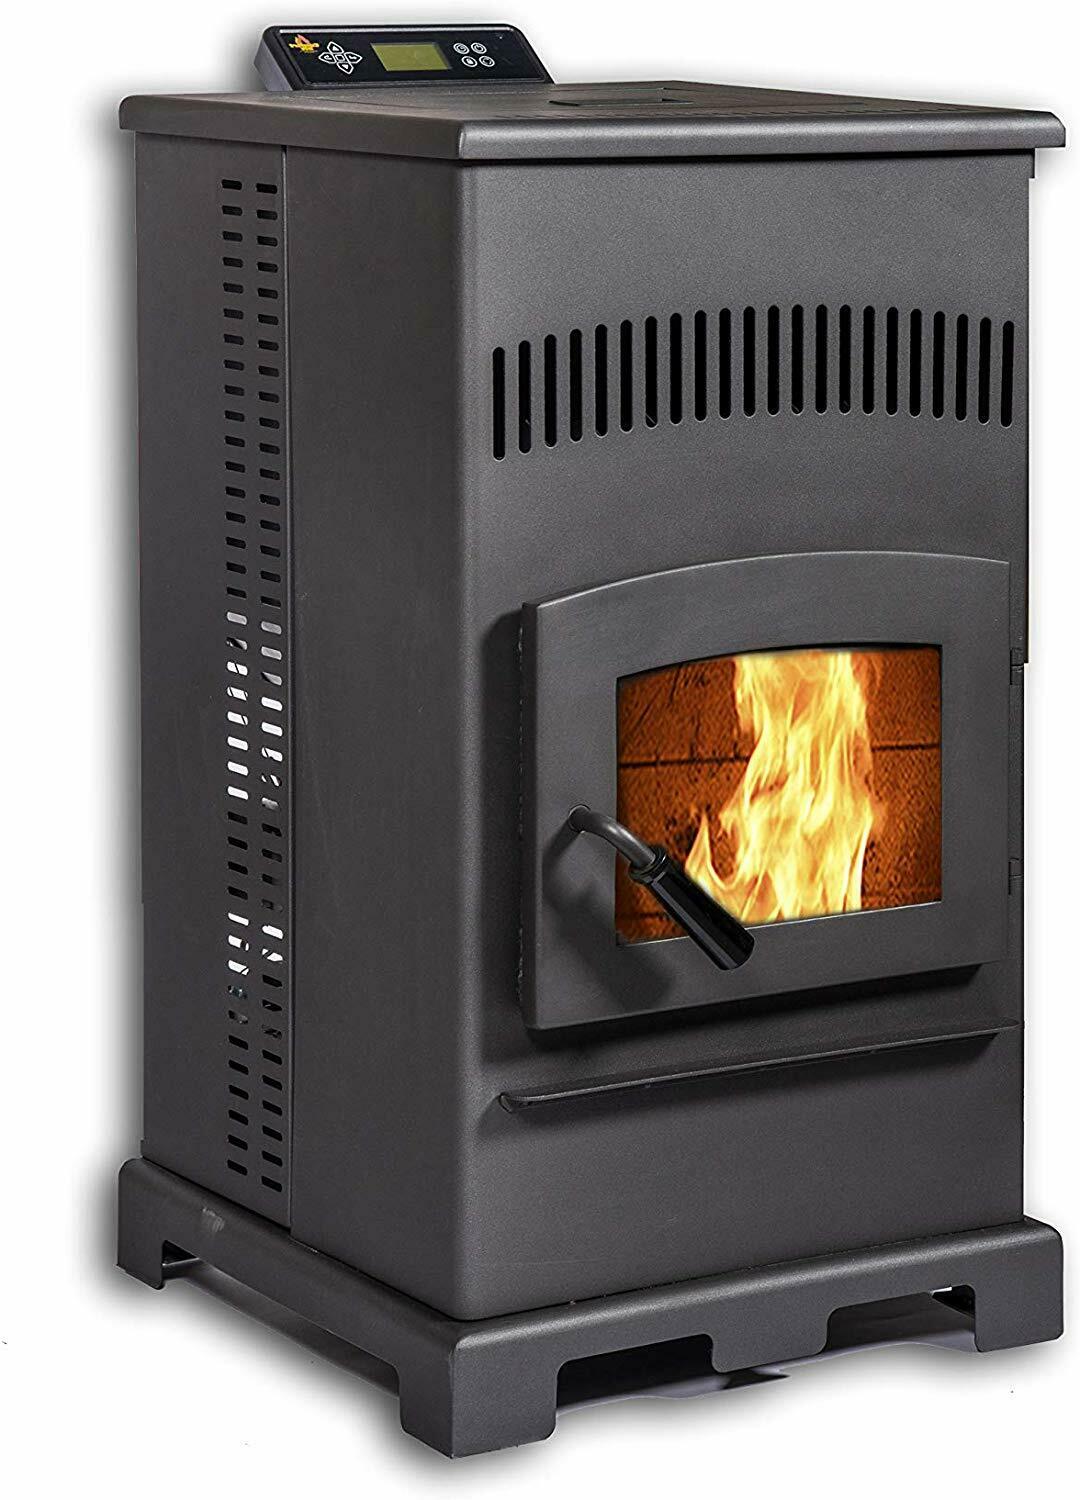 ComfortBilt HP55 2,800 sq. ft. EPA Certified Pellet Stove with Auto Ignition 50 lb Hopper Capacity New